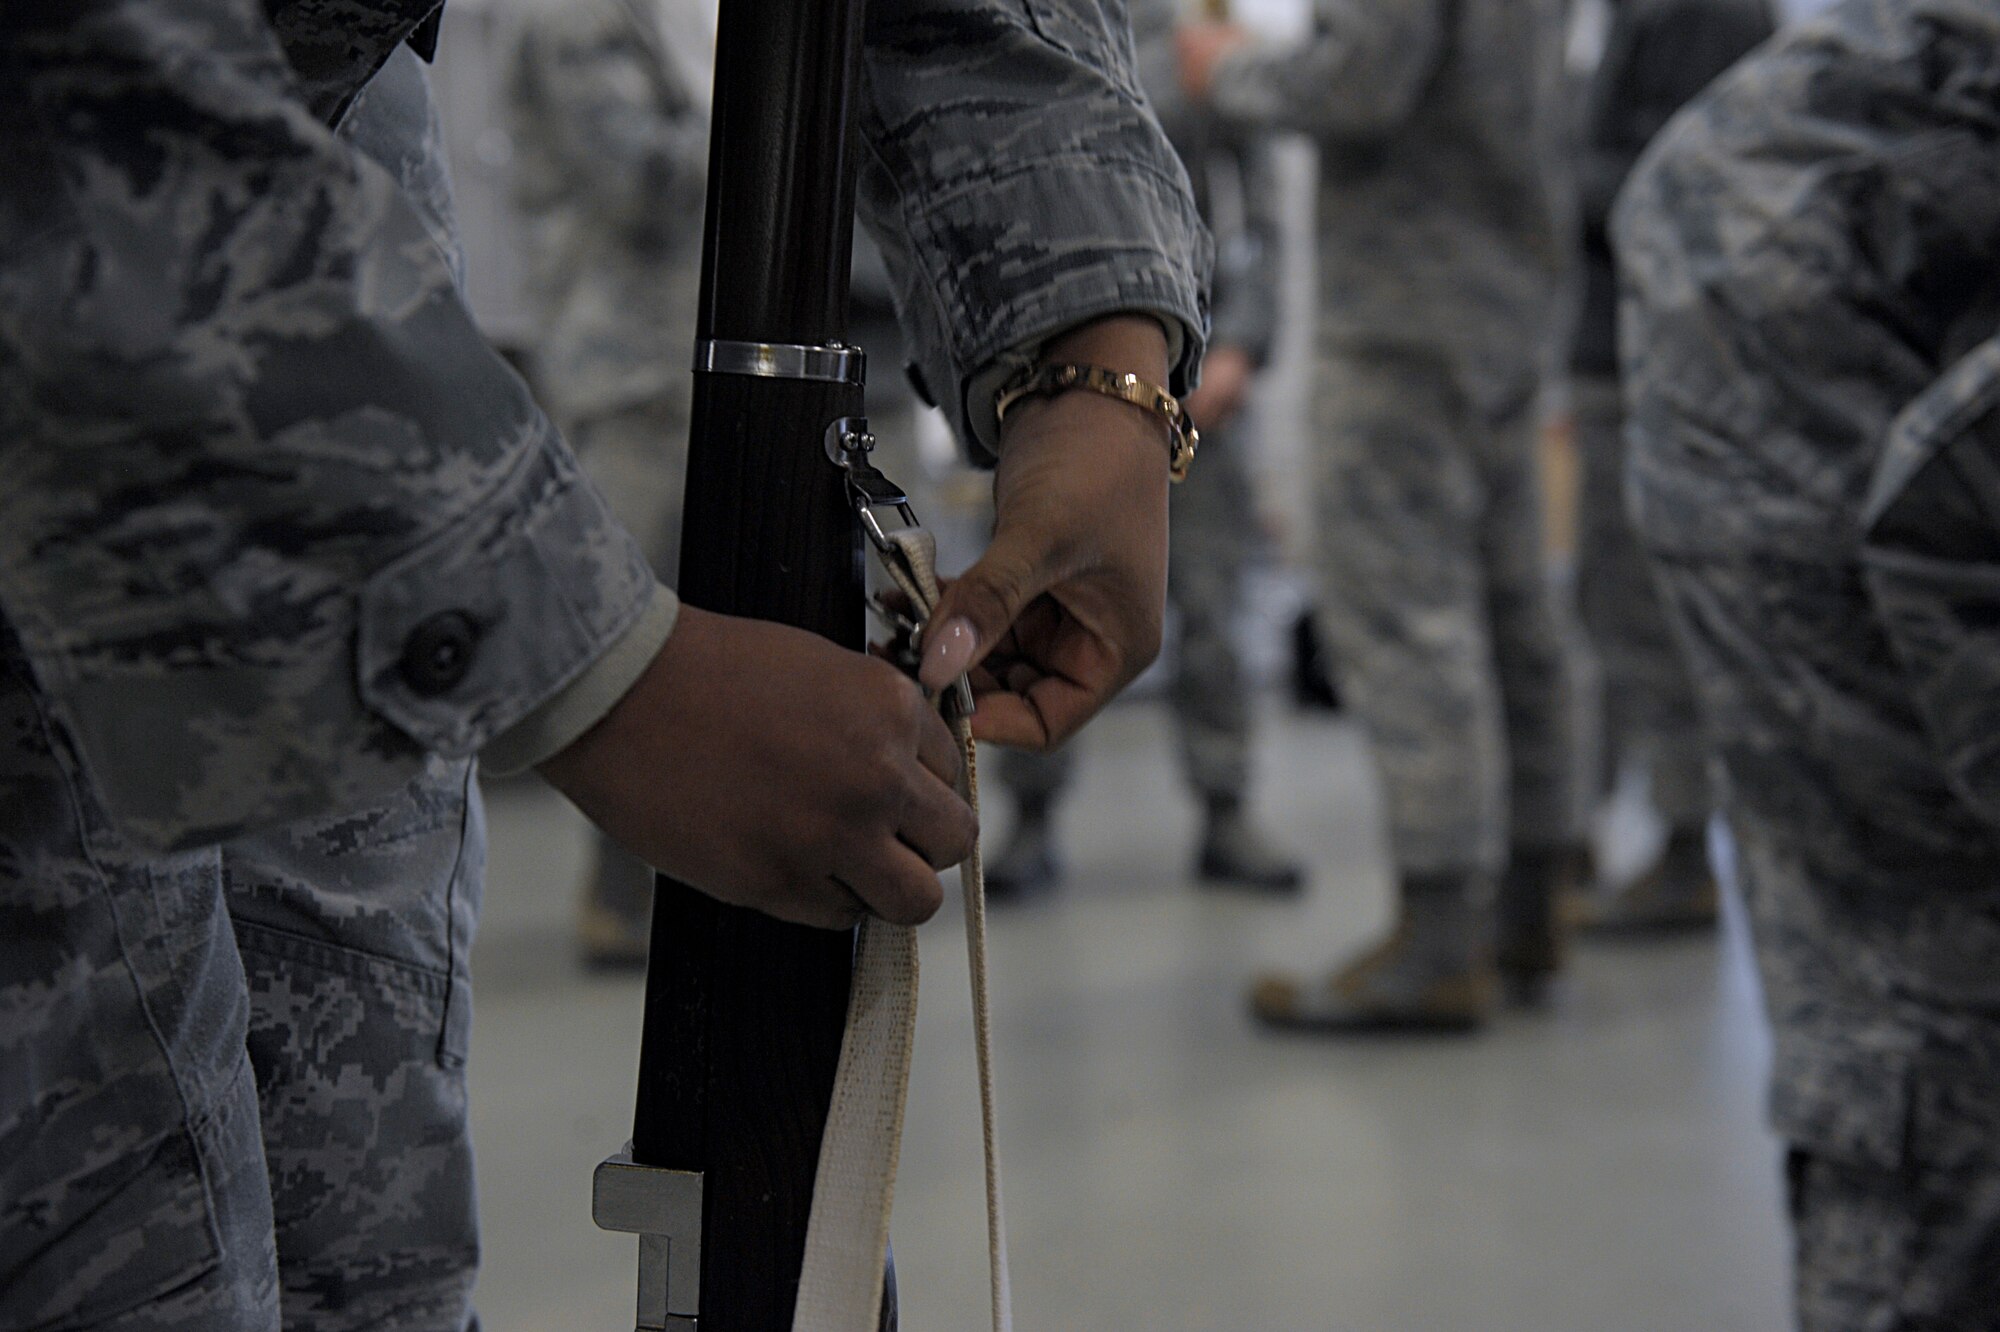 Senior Airman Angela Sams, 21st Operational Weather Squadron weather forecaster, secures a strap to a ceremonial rifle March 15, 2016, at Ramstein Air Base, Germany. Sams and other members of the Ramstein Honor Guard learned skills and techniques from U.S. Air Force Honor Guard members to become better honor guardsmen. (U.S. Air Force photo/Staff Sgt. Timothy Moore)